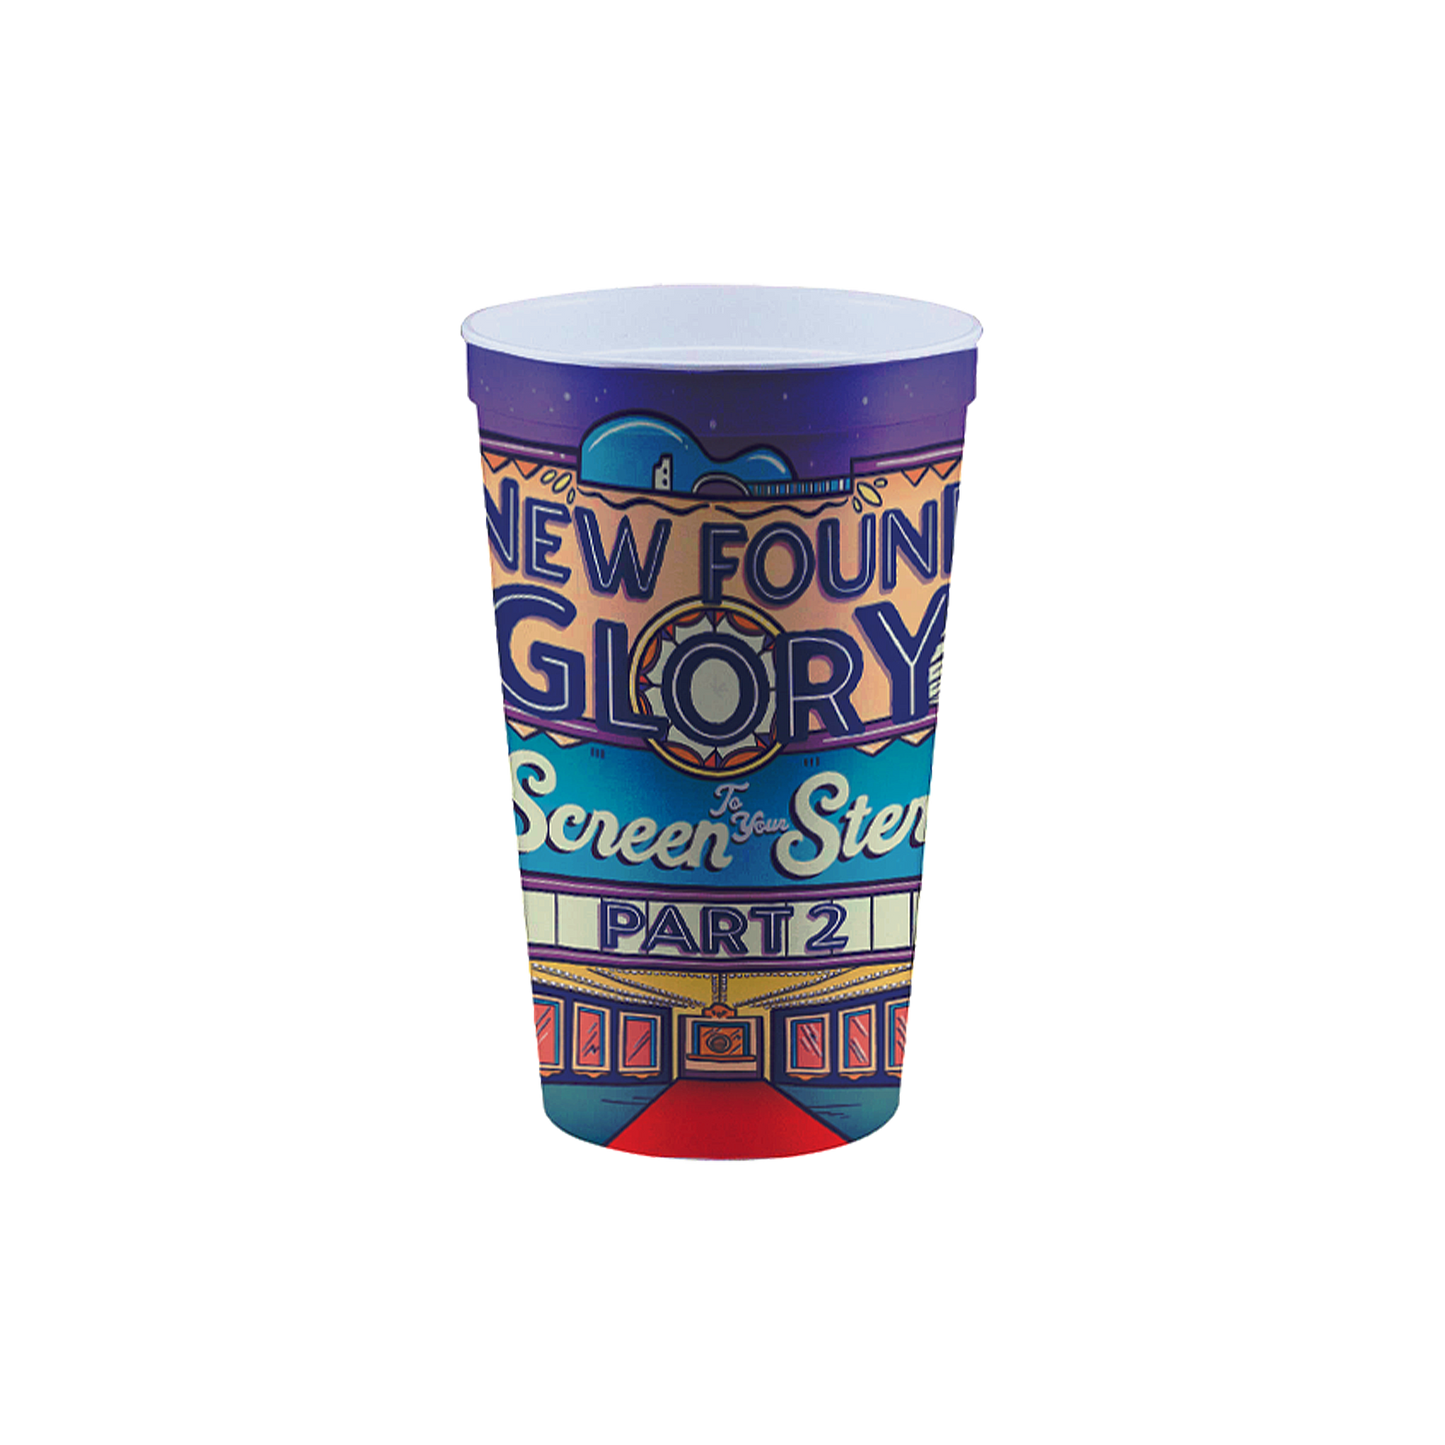 New Found Glory - From The Screen To Your Stereo Part 2 - Collector's Cup